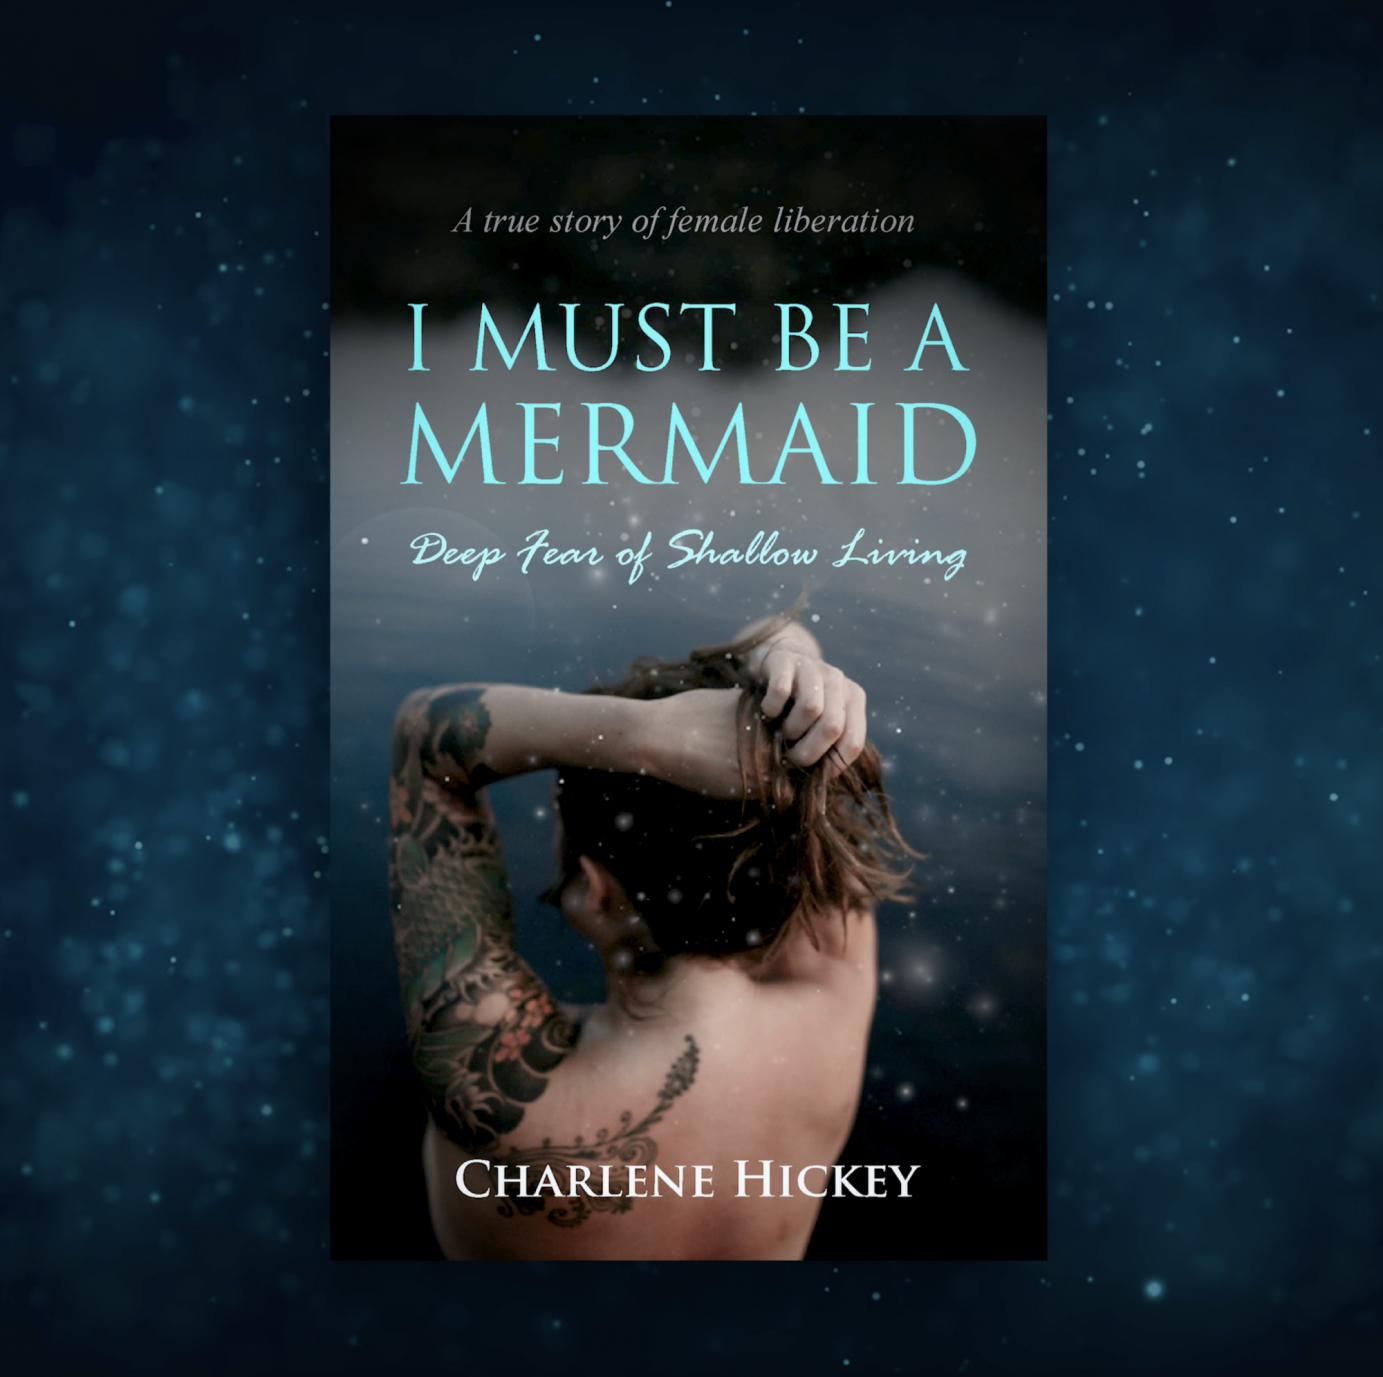 I must be a mermaid: Book Promo Video